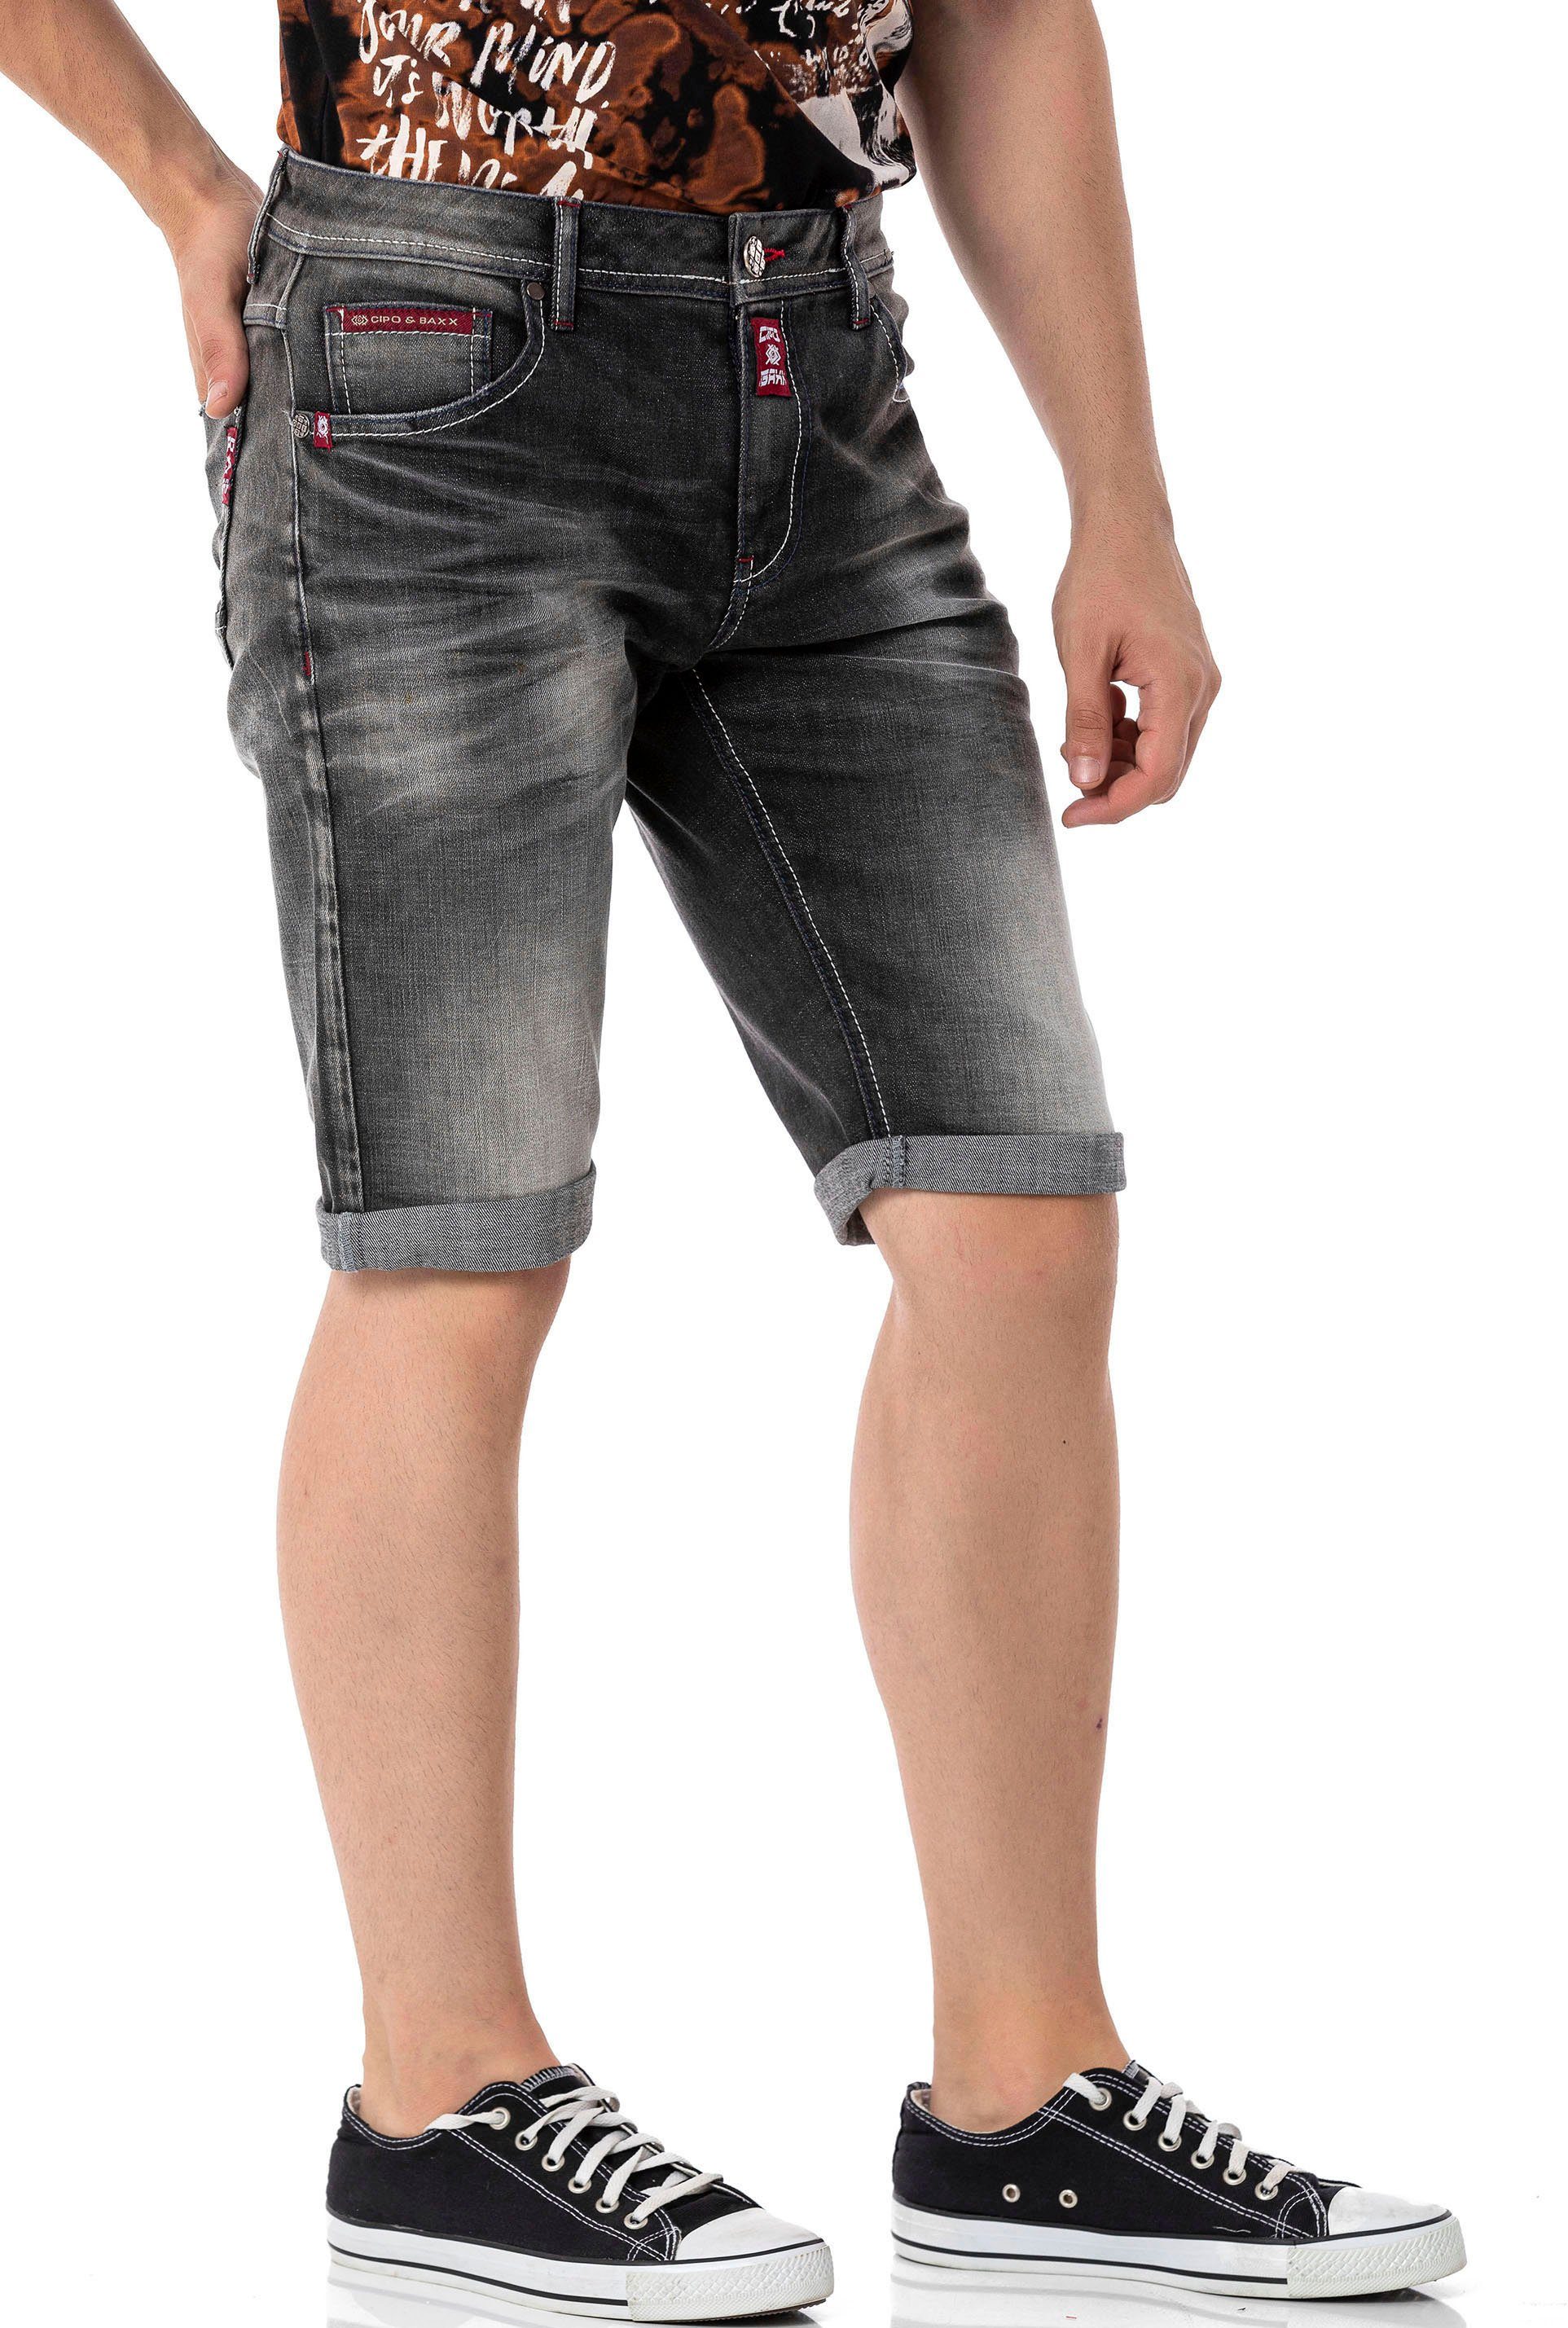 Cipo & Baxx Jeansshorts used black